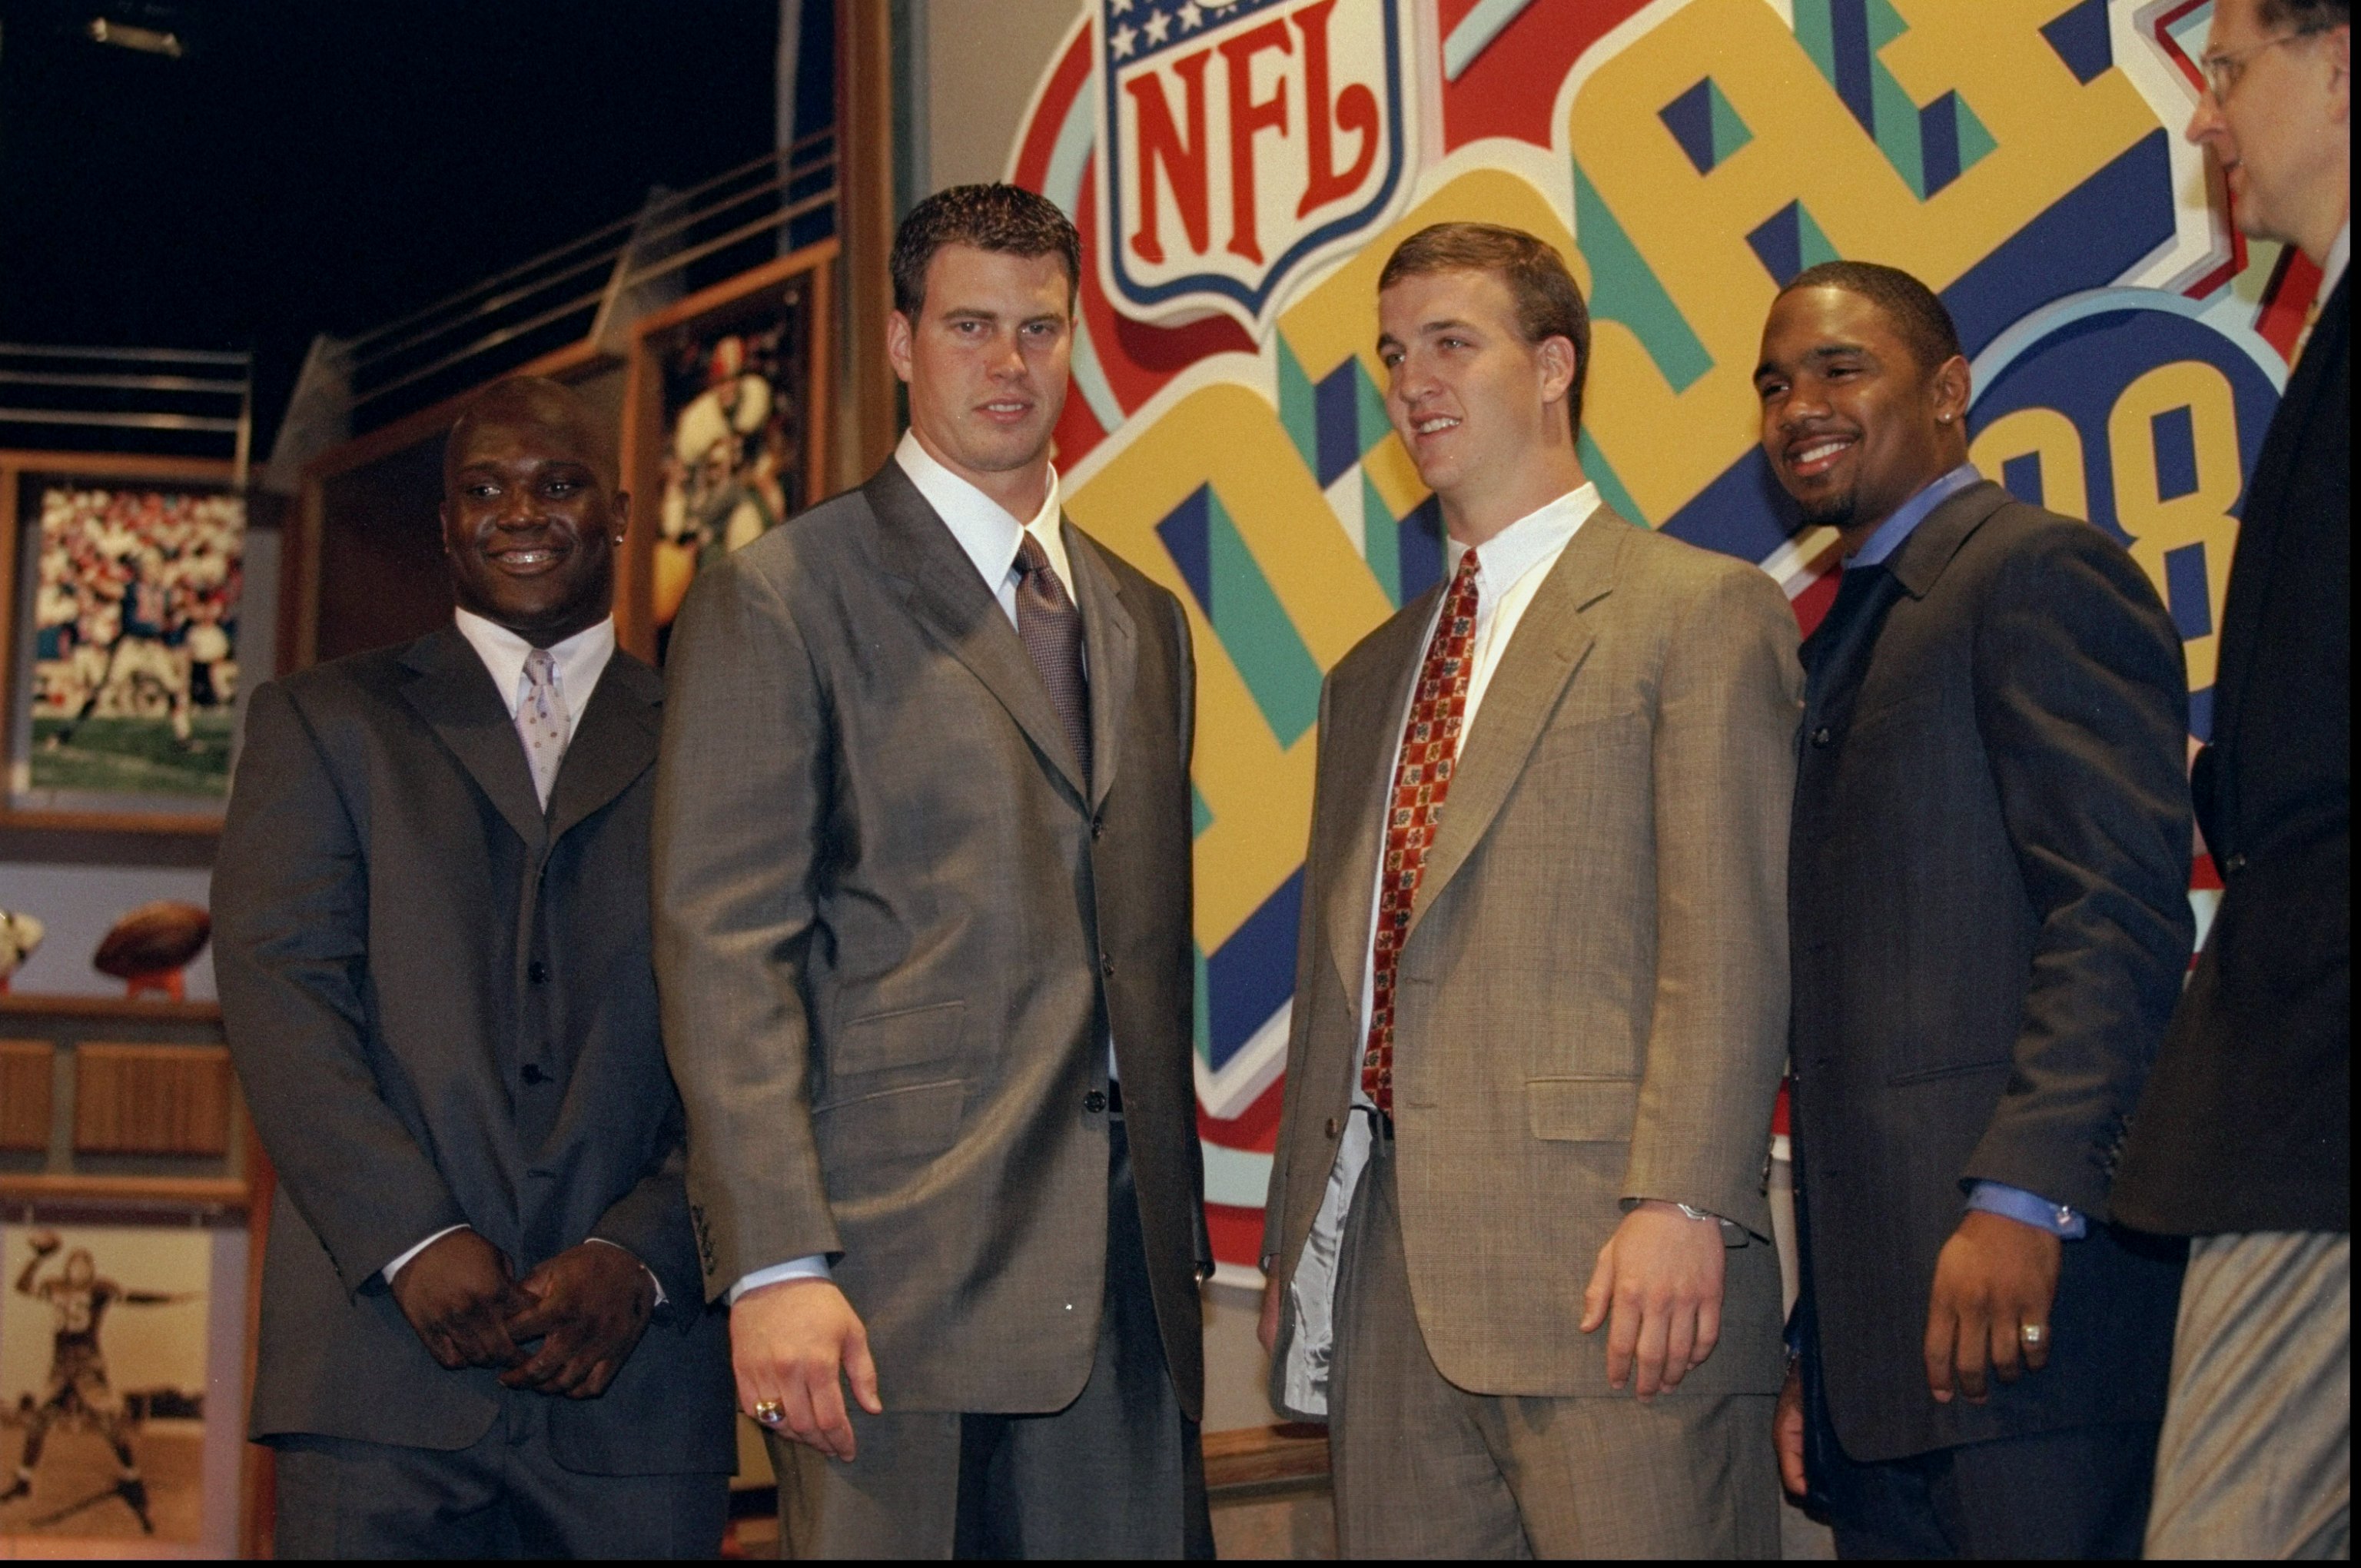 Running back Curtis Enis, defensive back Charles Woodson and quarterbacks Ryan Leaf and Peyton Manning stand together during the NFL draft at Madison Square Garden in New York City, NY